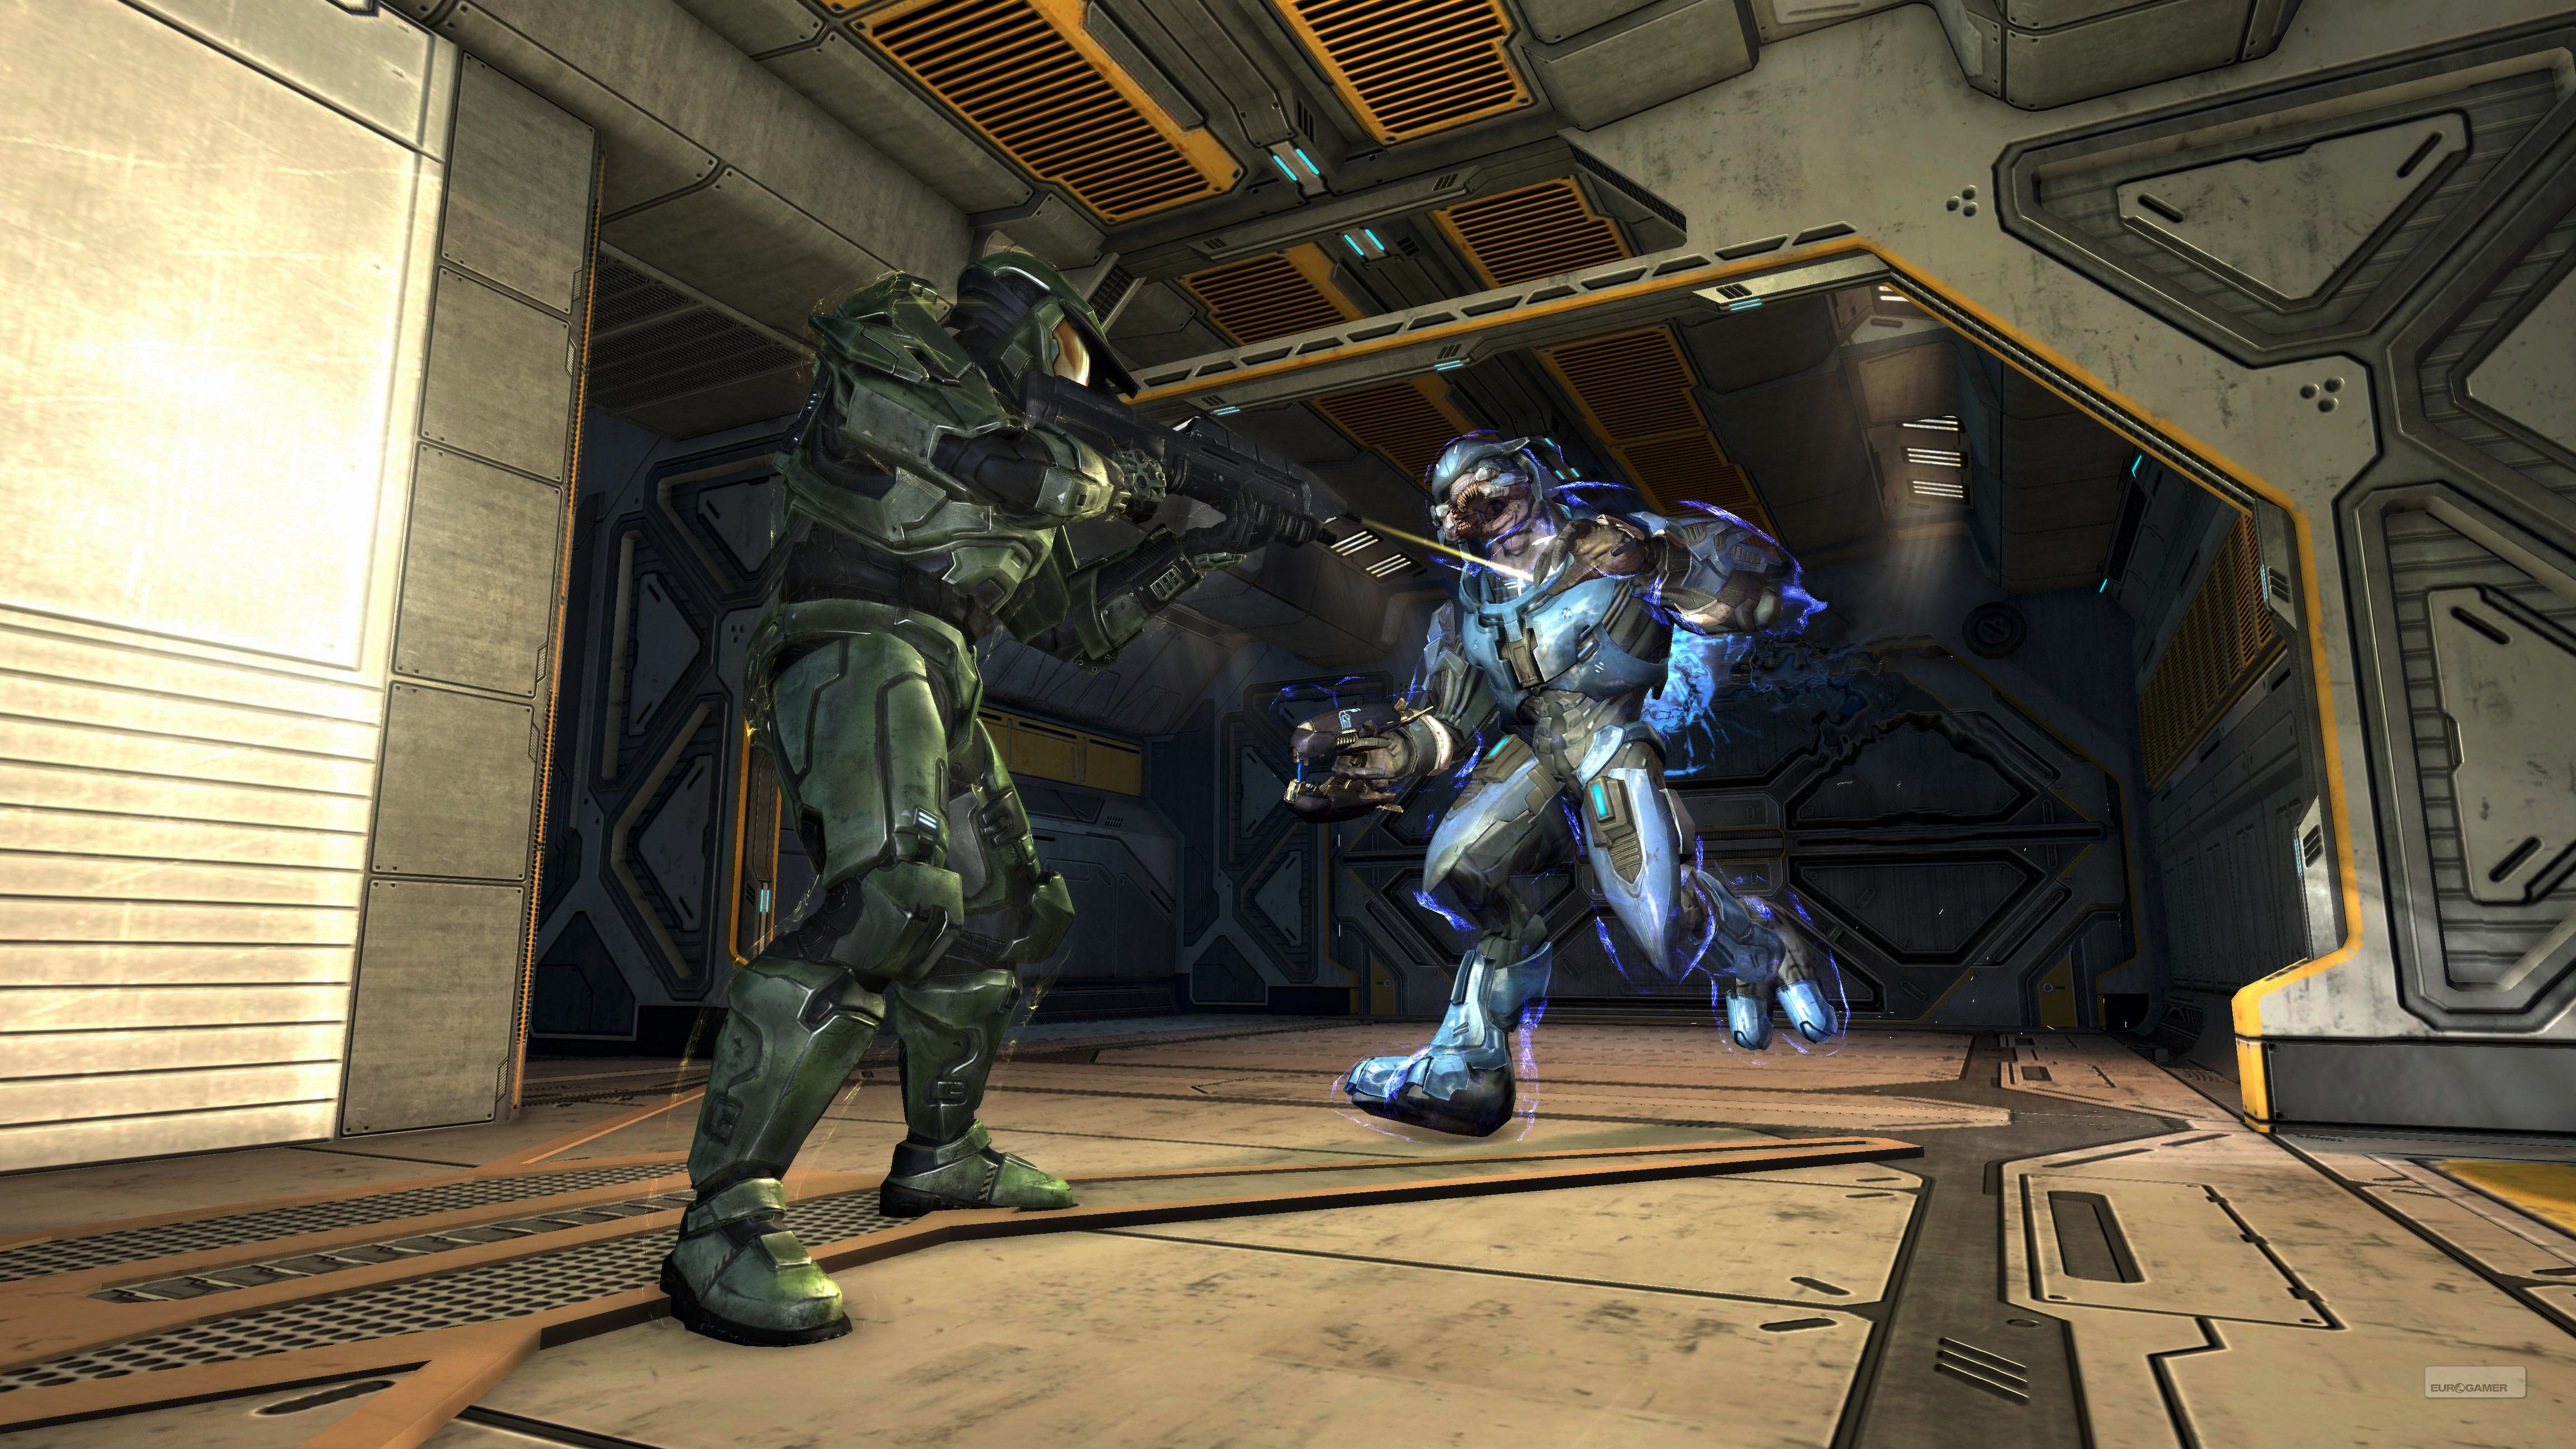 Halo: Combat Evolved Anniversary is now available on PC